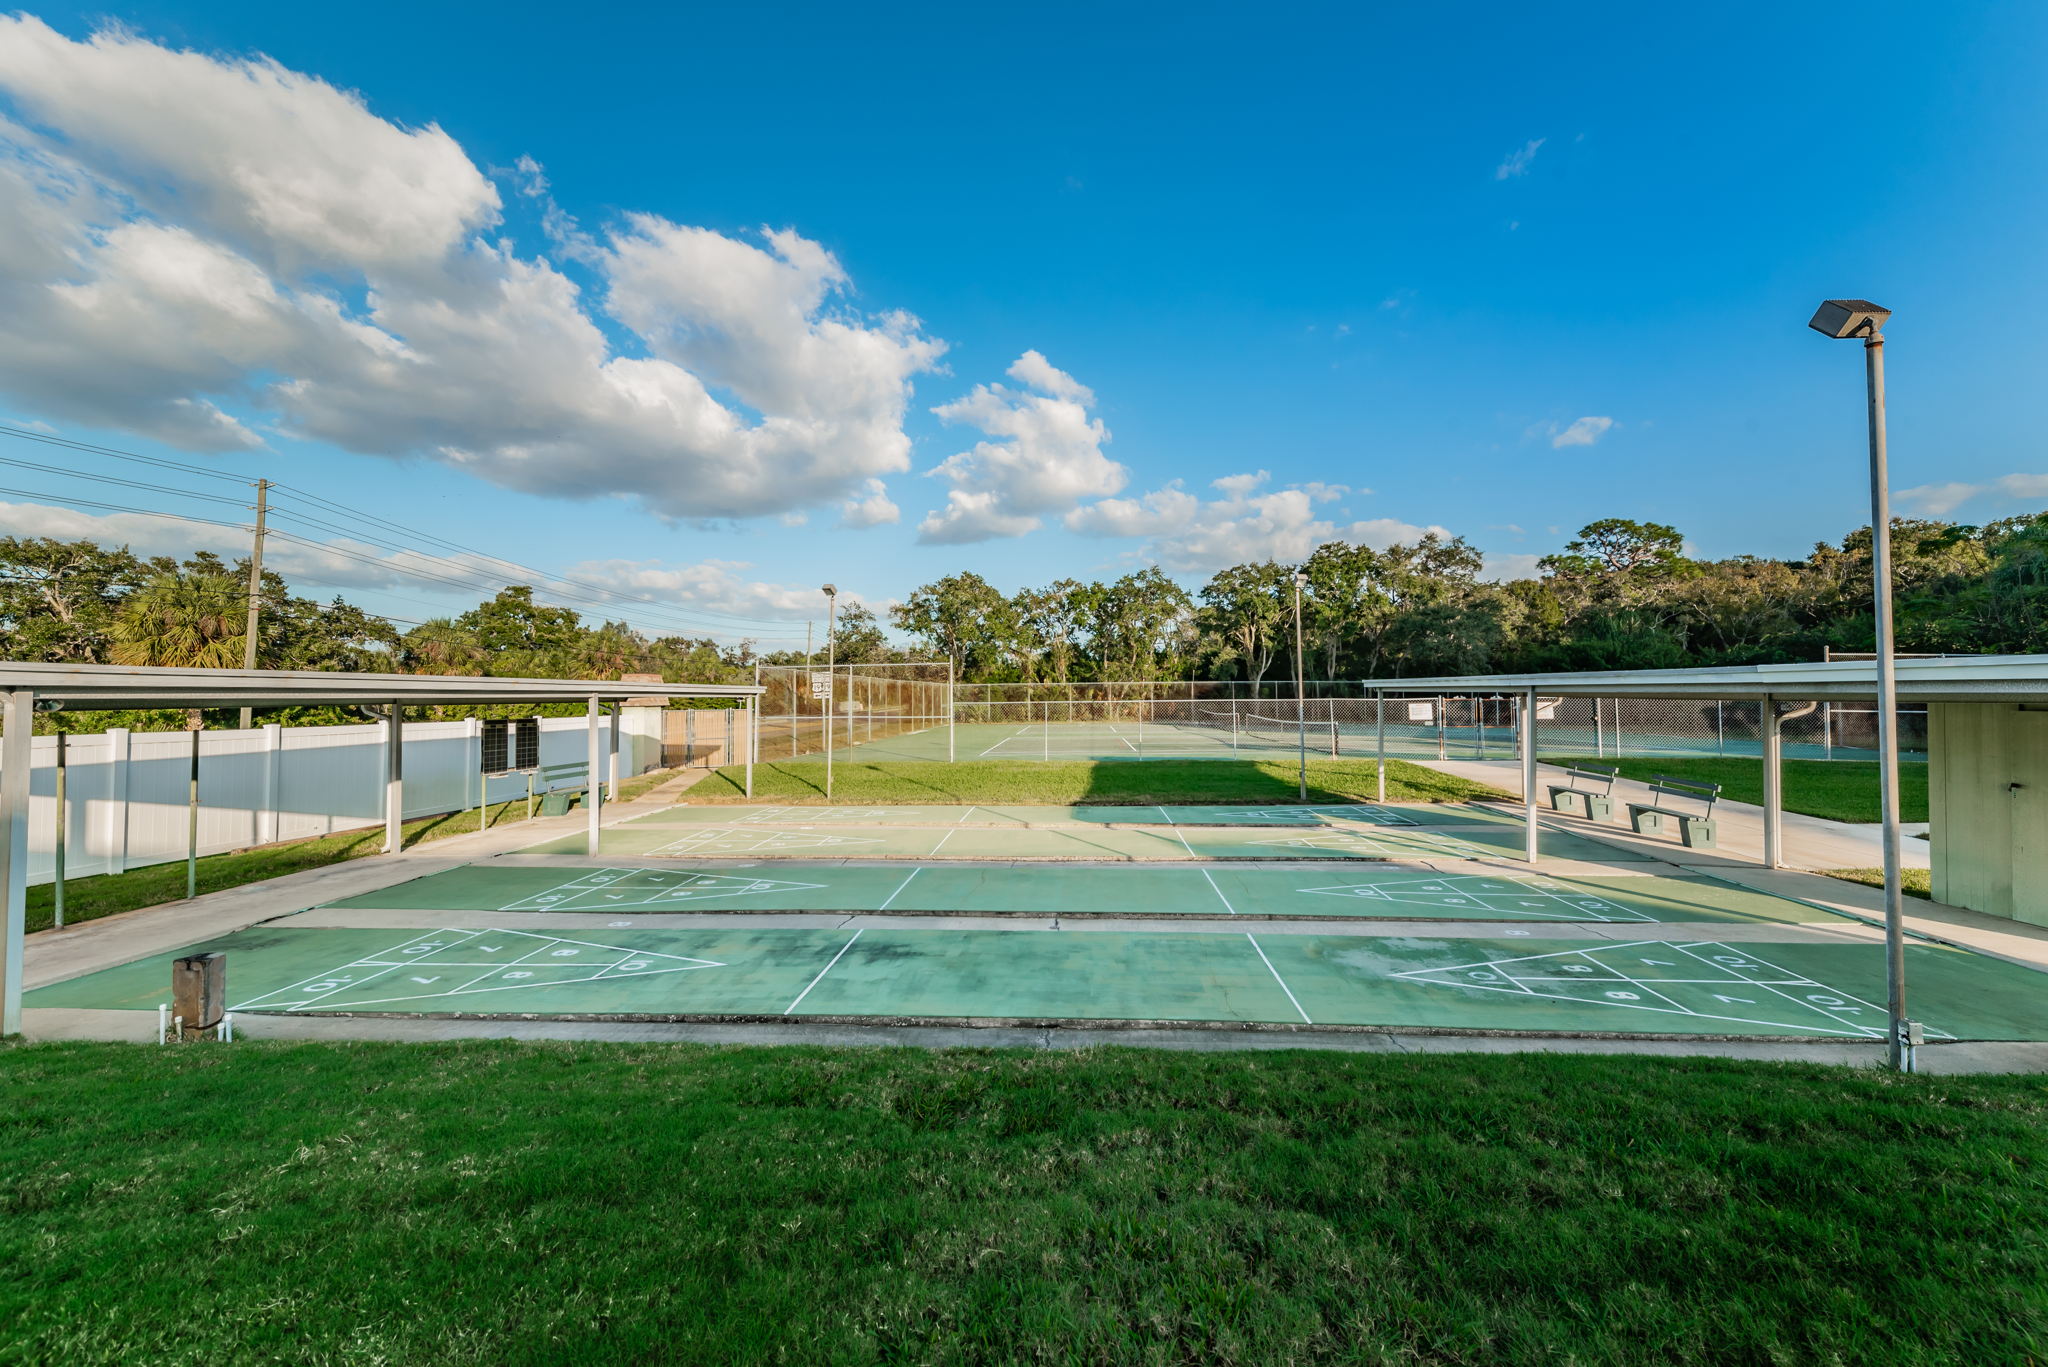 29-Green Dolphin Pool Shuffleboard and Tennis Courts